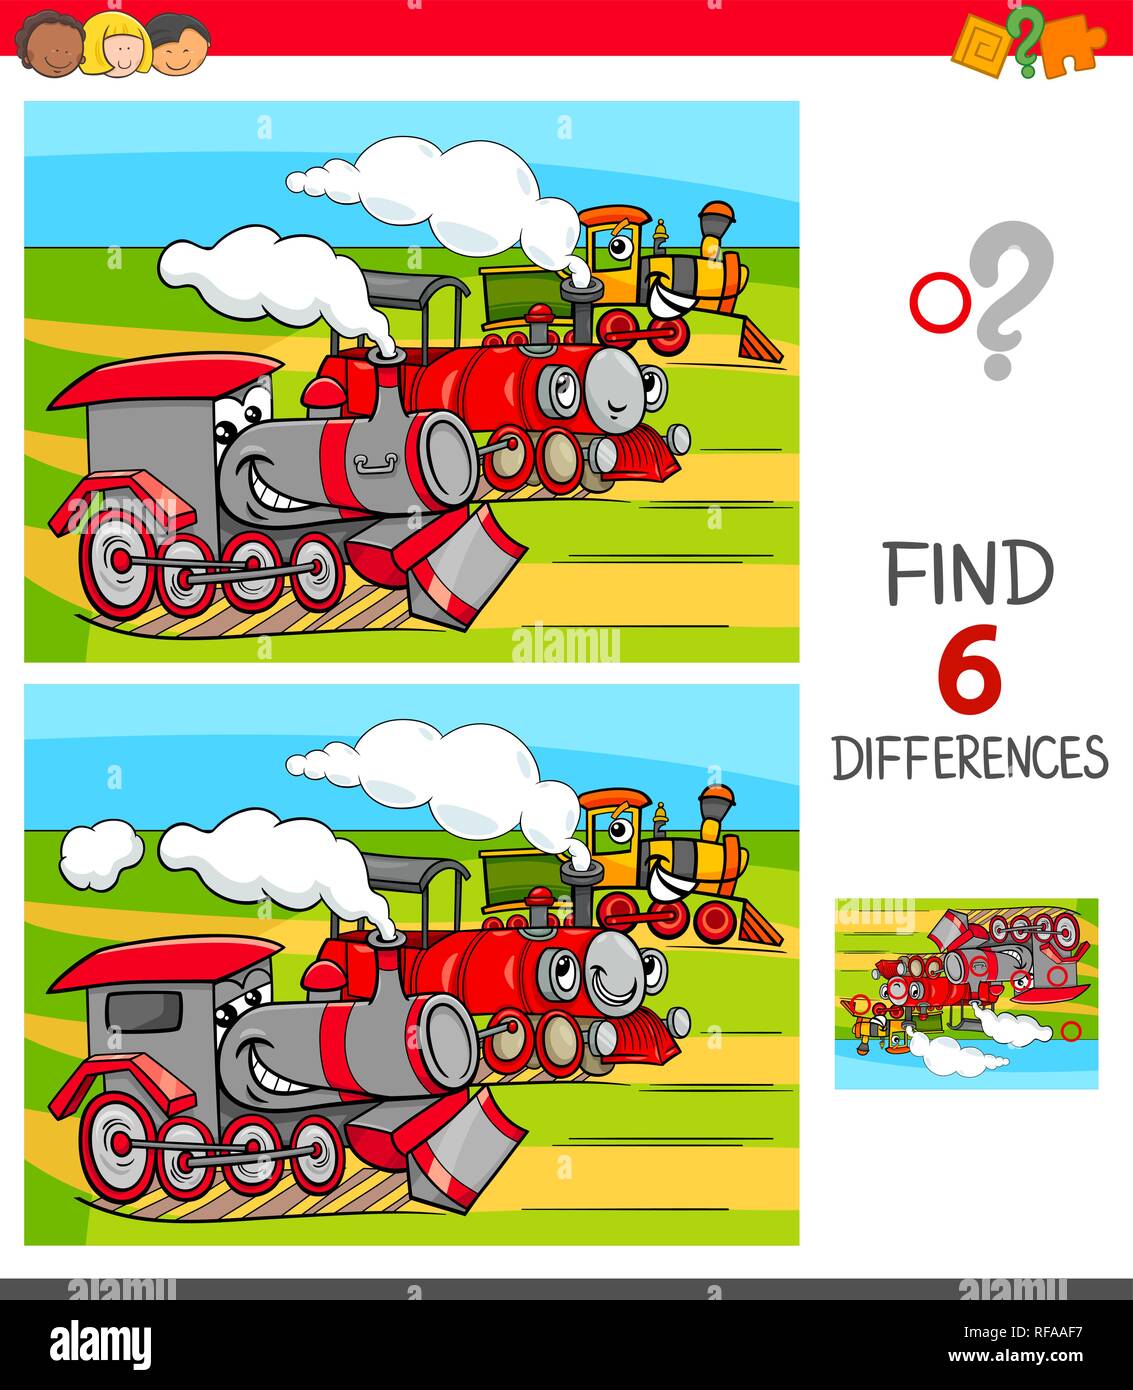 Cartoon Illustration of Finding Six Differences Between Pictures Educational Game for Children with Funny Locomotives Stock Vector